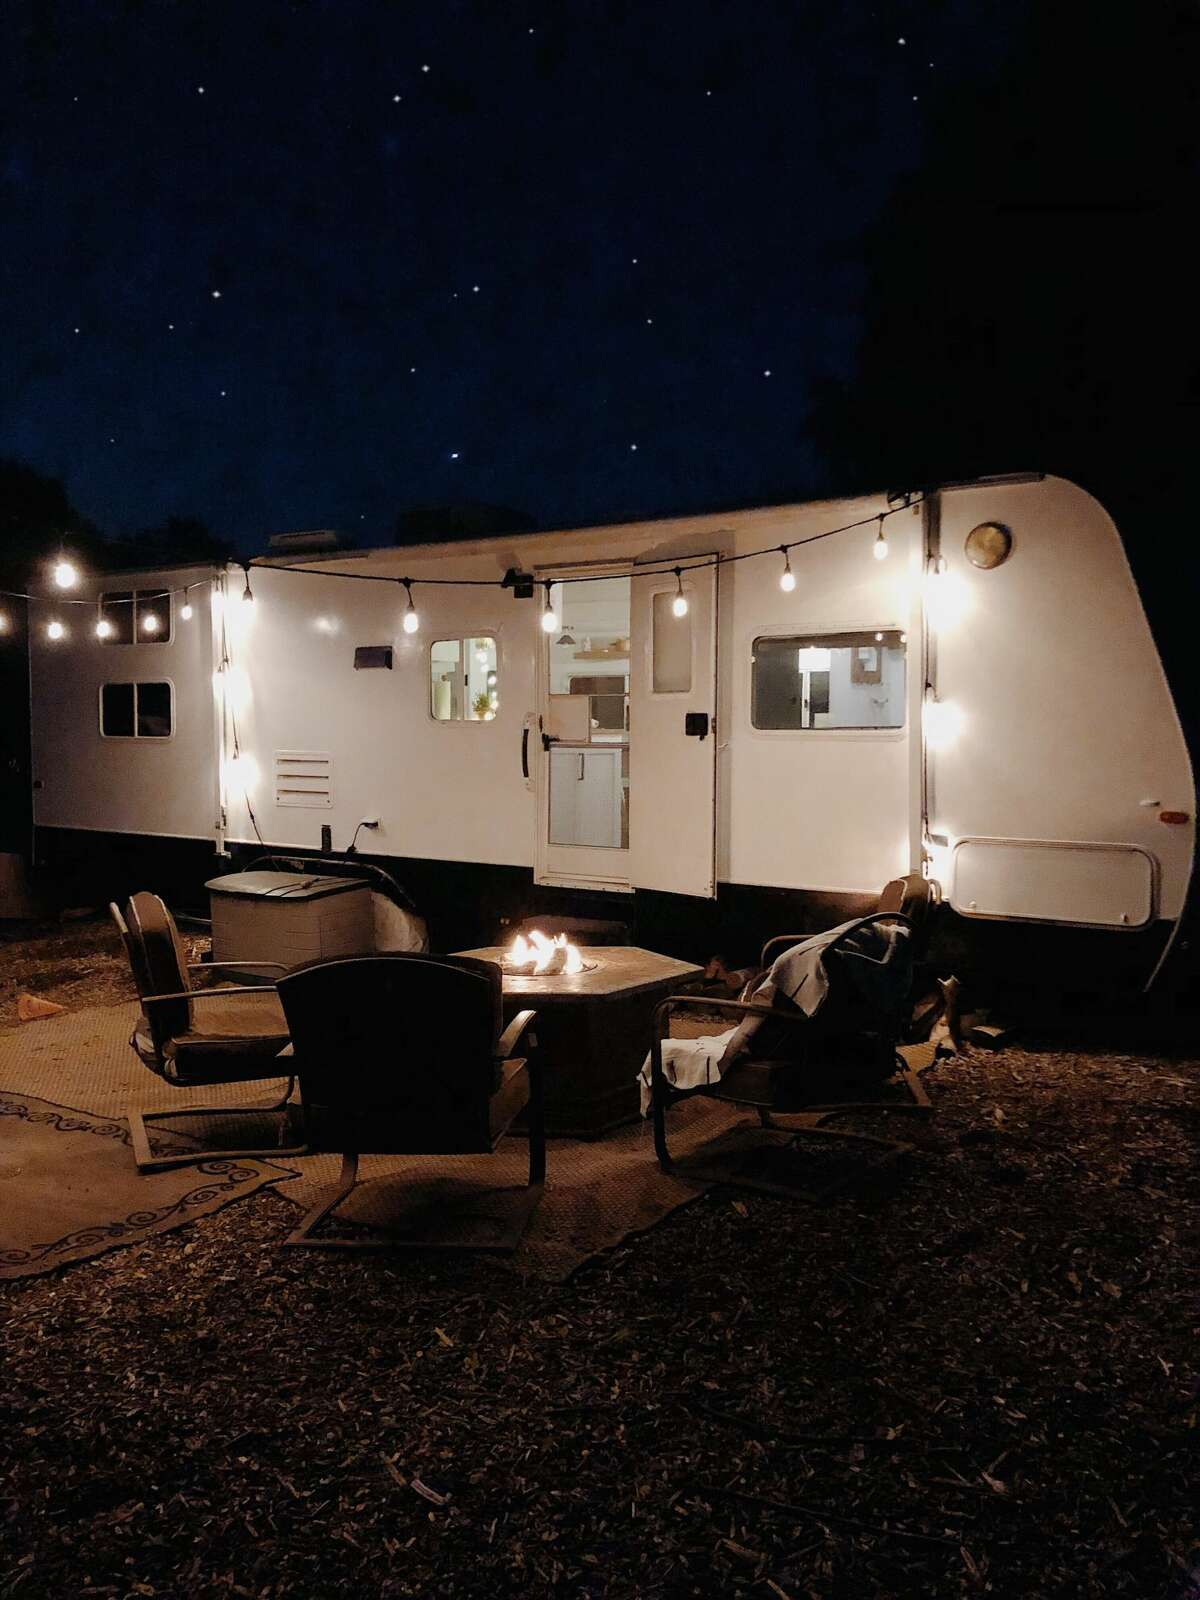 A California family of five sold their five-bedroom home to buy a 2.2-acre piece of rural land in Ventura County. To save money to build their dream home on their land, they're living in a 150-square-foot fully renovated trailer. See photos of their groovy living situation on Instagram at @arrowsandbow.